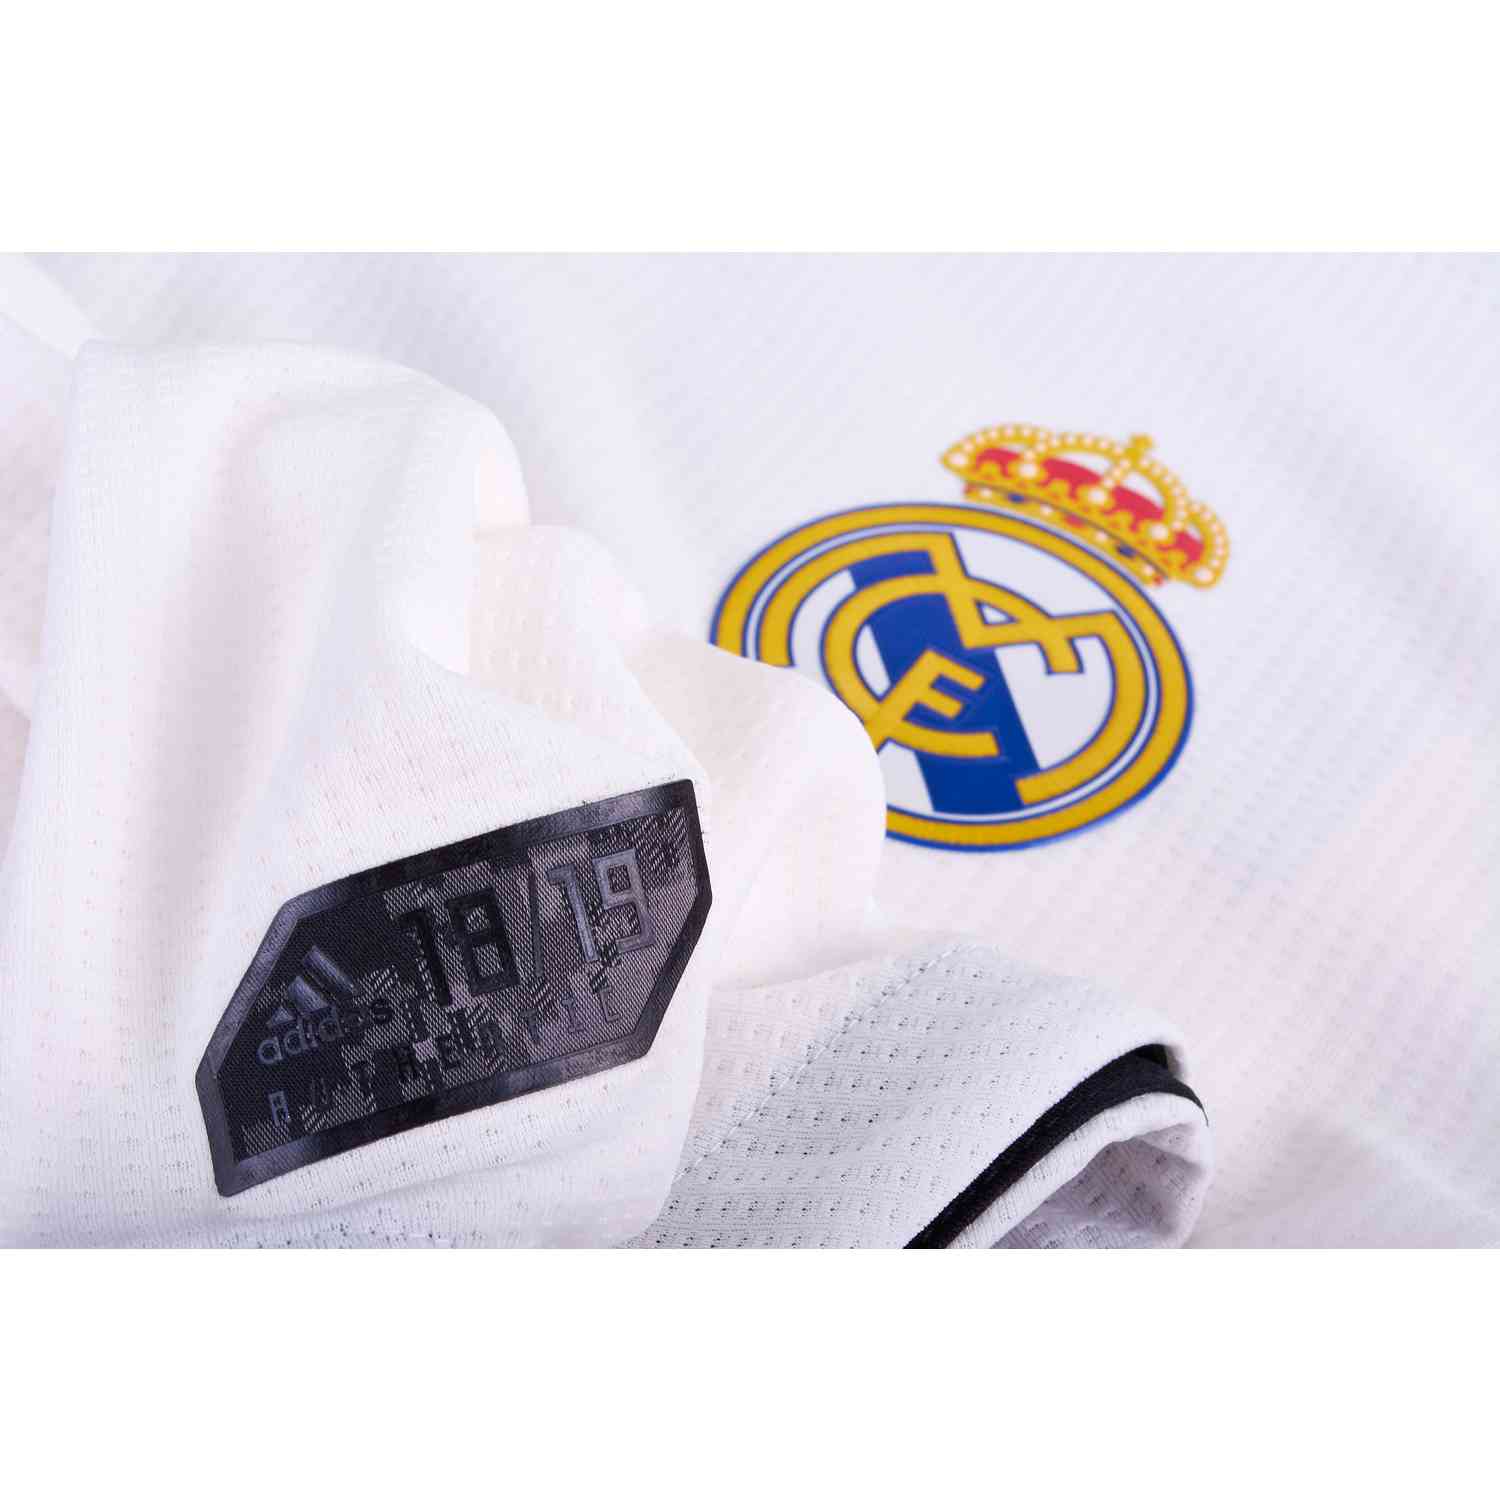 2018-19 Real Madrid adidas Player Issue Authentic Home Shirt *w/tags* CG0561